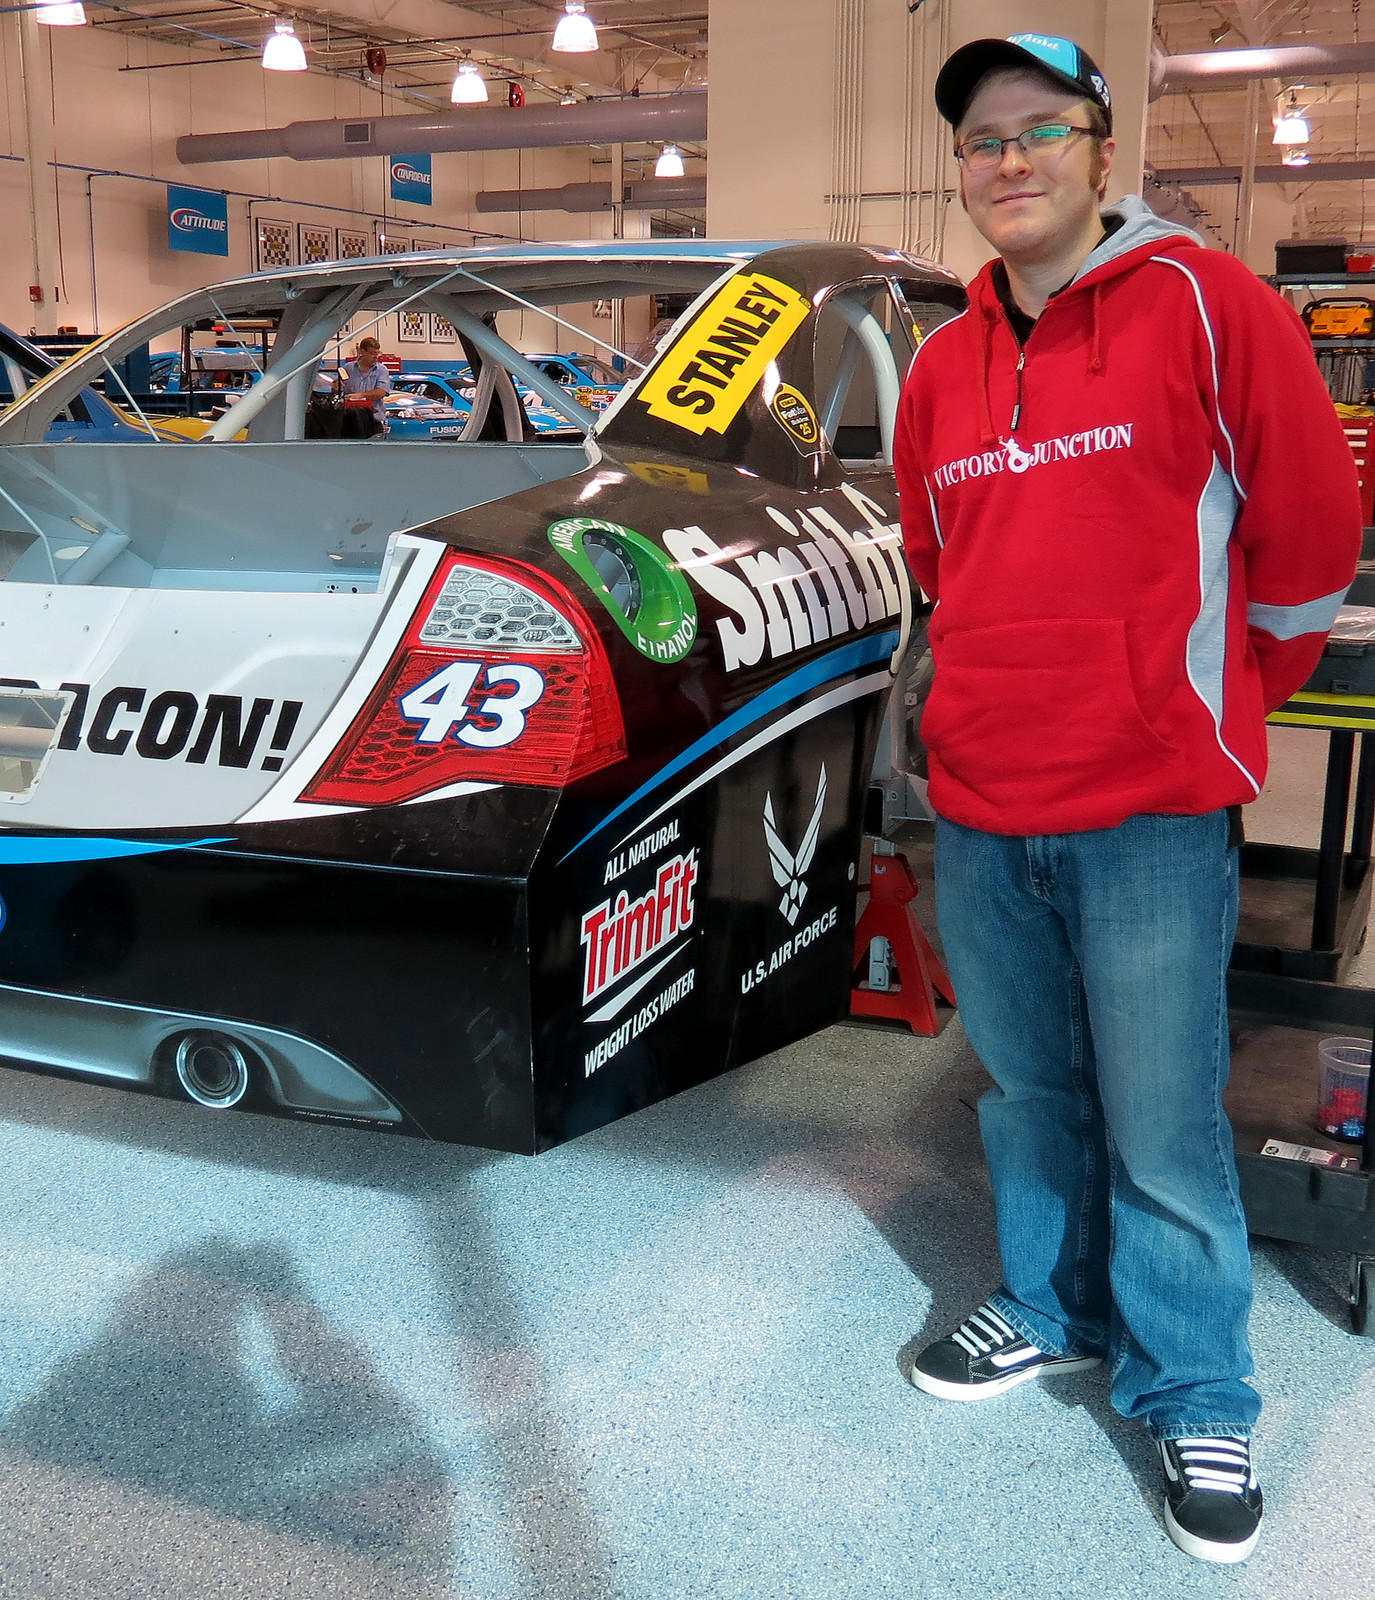 Standing with the previously raced Watkins Glen car as it sits in the Richard Petty Motorsports race shop